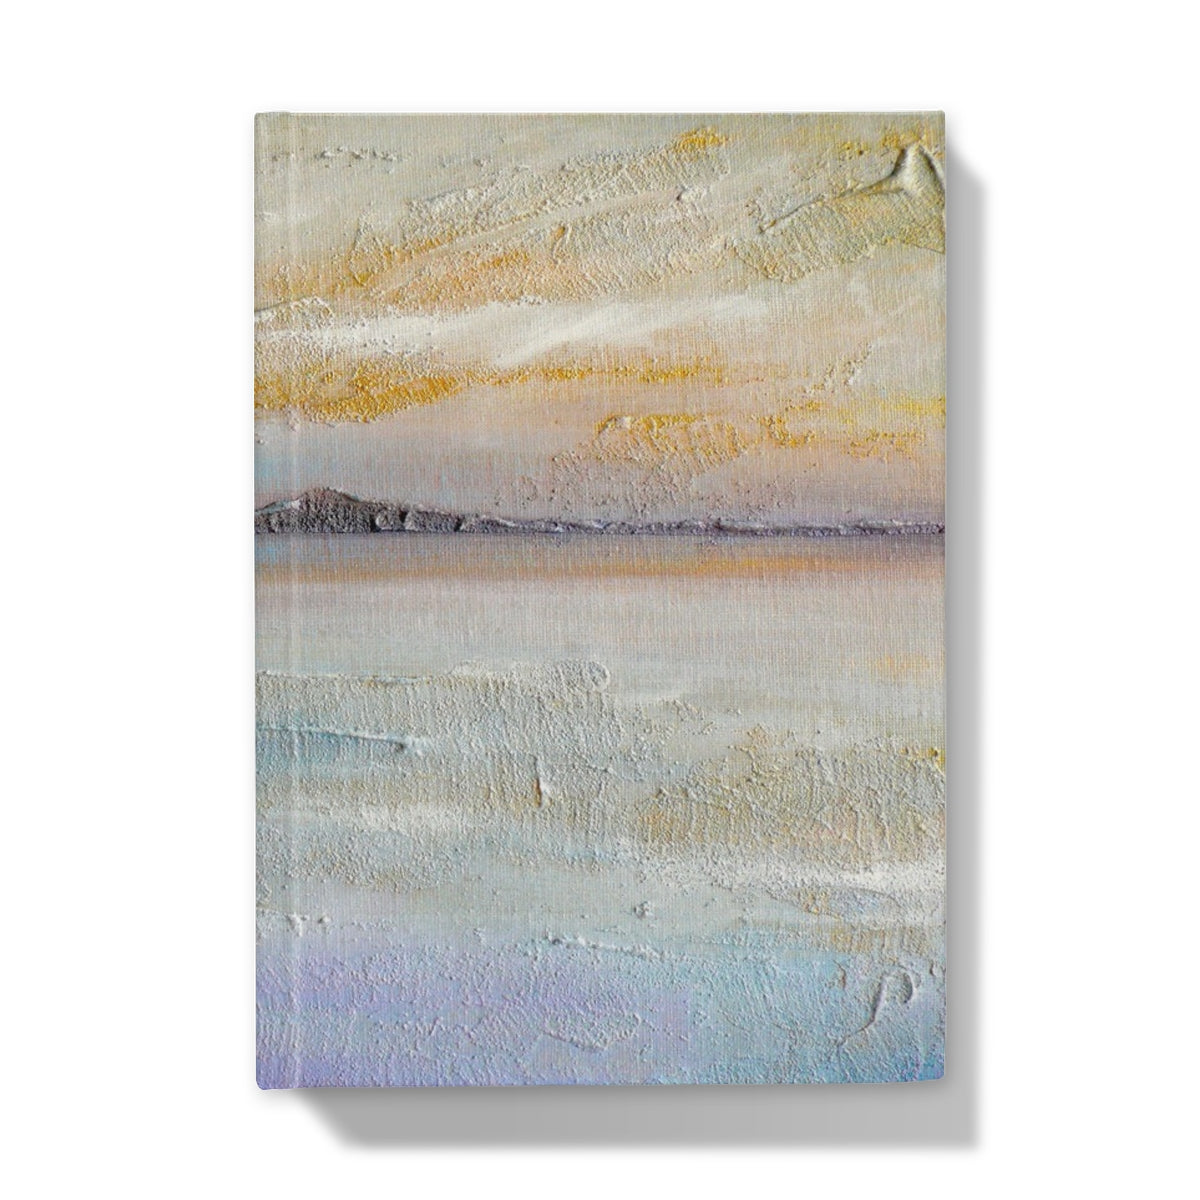 Sollas Beach South Uist Art Gifts Hardback Journal-Journals & Notebooks-Hebridean Islands Art Gallery-A5-Lined-Paintings, Prints, Homeware, Art Gifts From Scotland By Scottish Artist Kevin Hunter